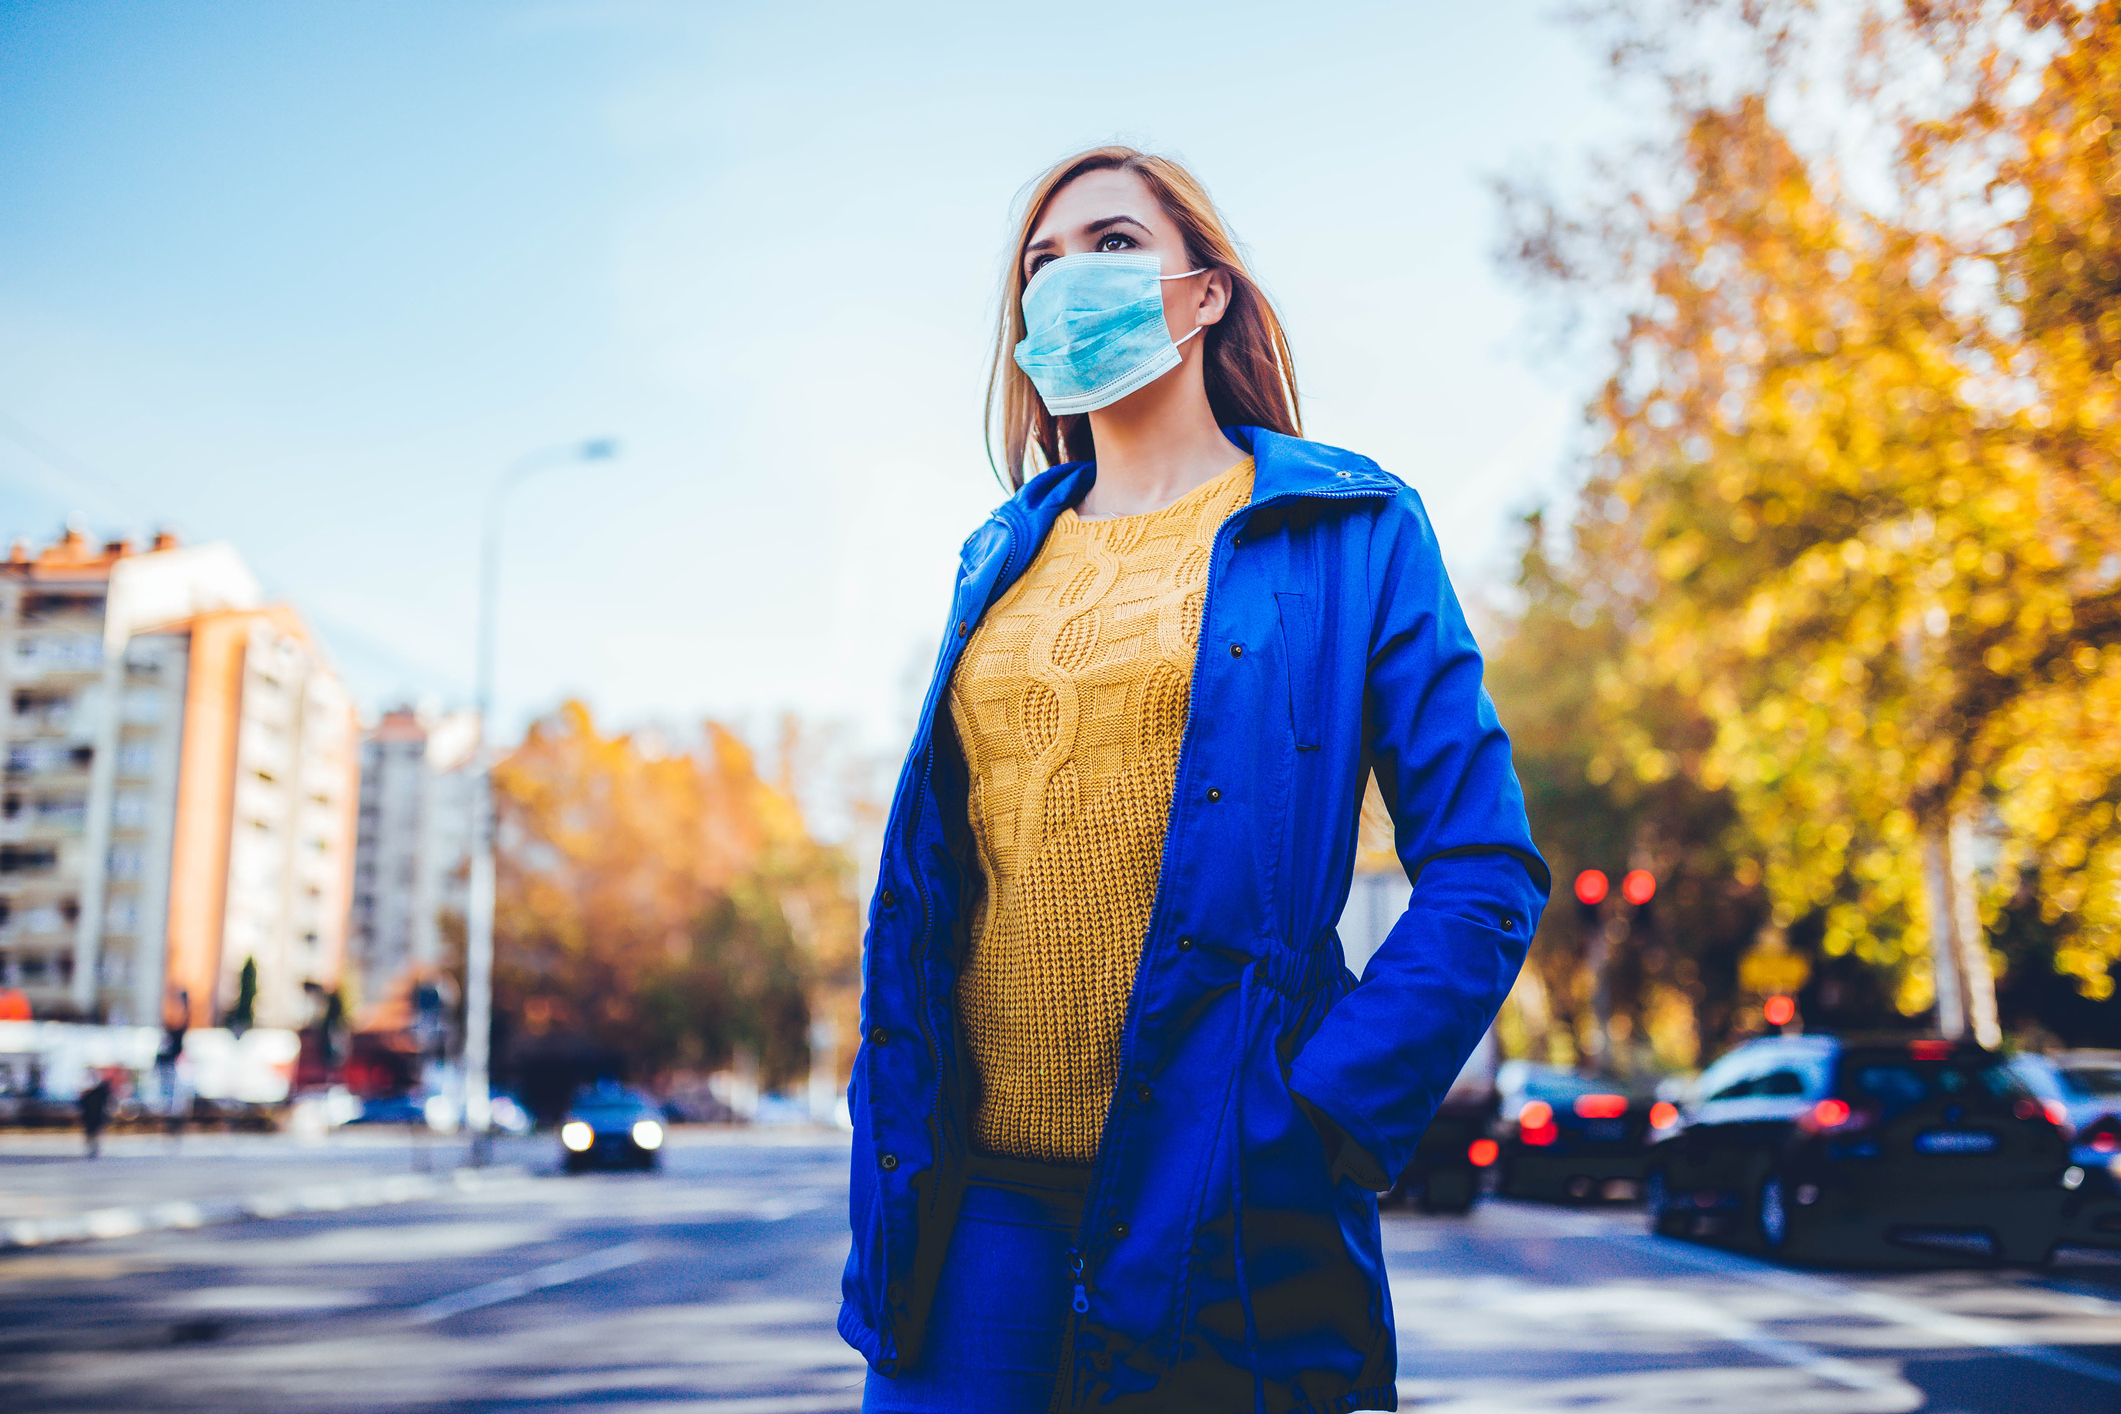 Young woman wearing face mask because of air pollution in the city